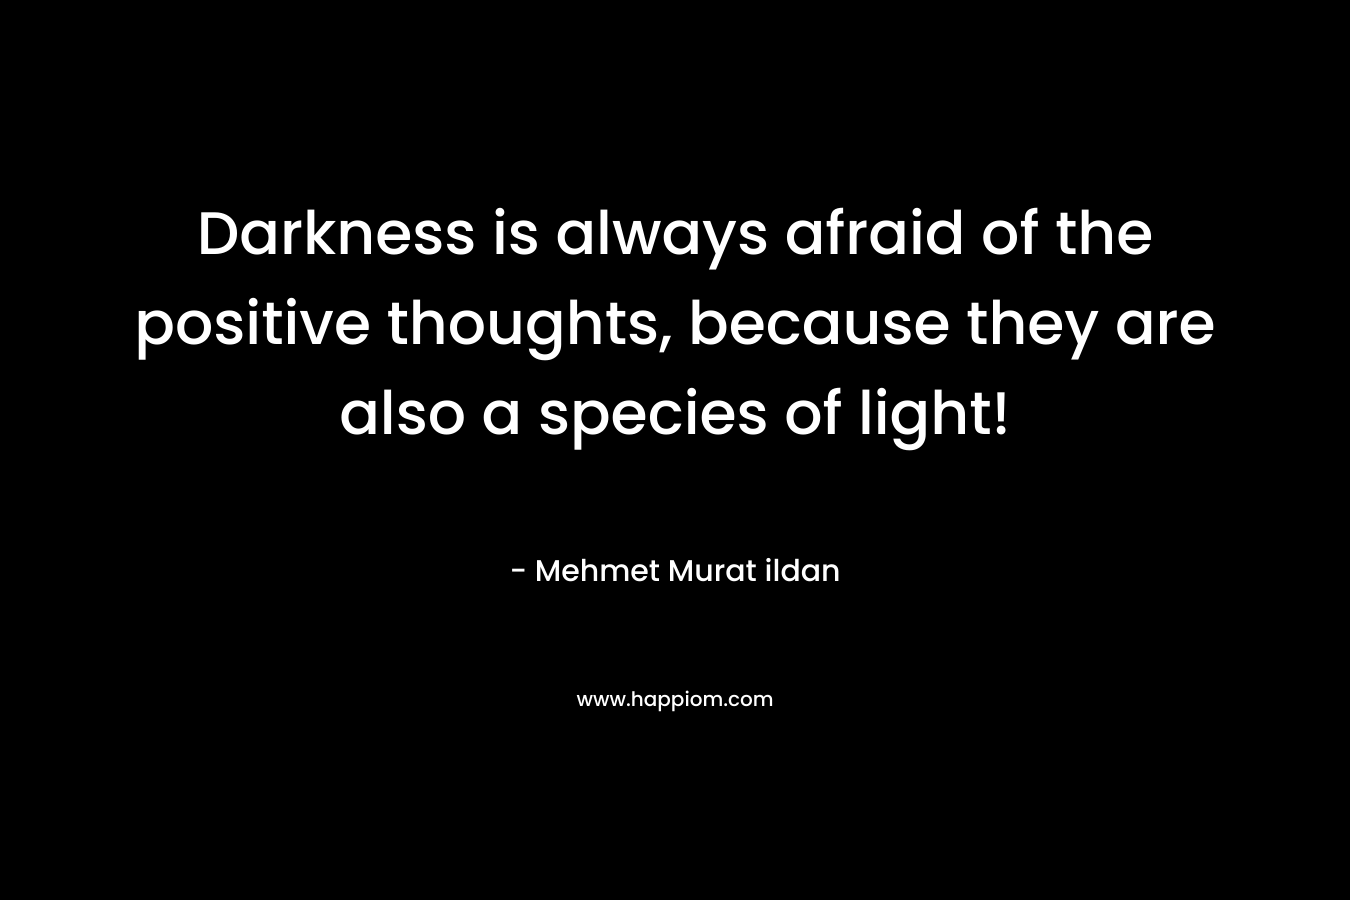 Darkness is always afraid of the positive thoughts, because they are also a species of light!